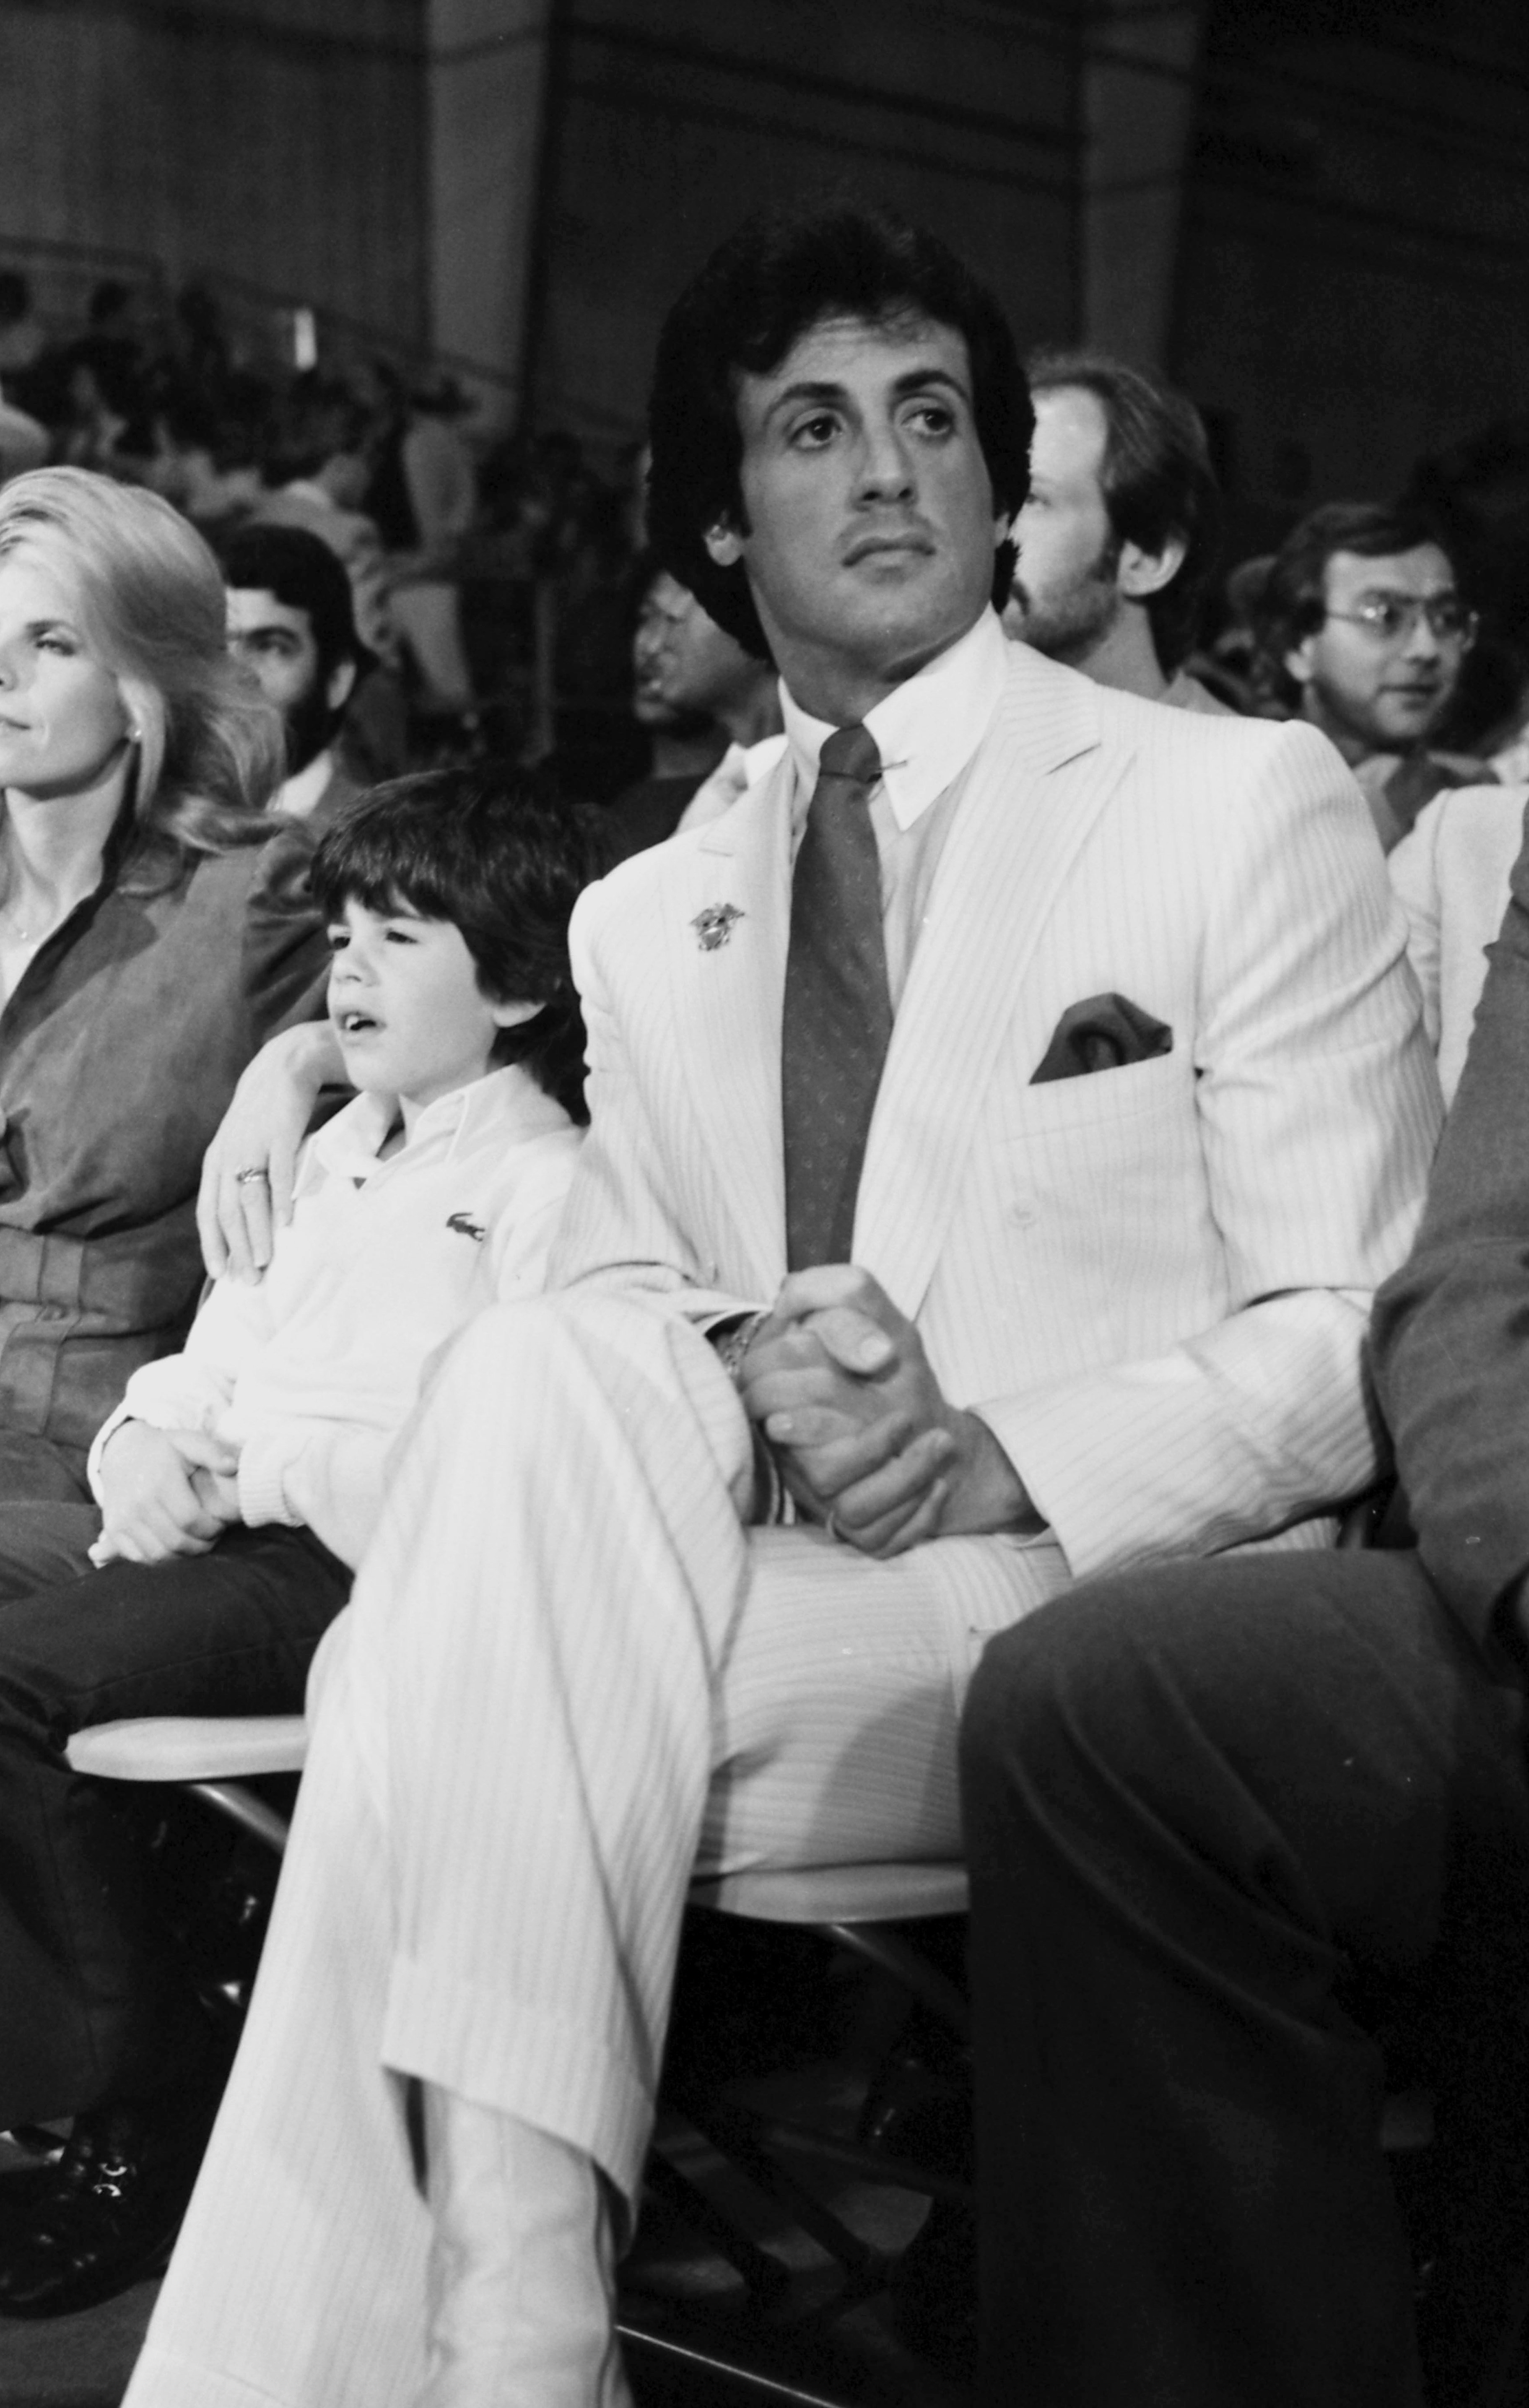 Sasha Czack, Sage Stallone, and Sylvester Stallone at a boxing match on October 30, 1982, in Las Vegas, Nevada. | Source: Getty Images